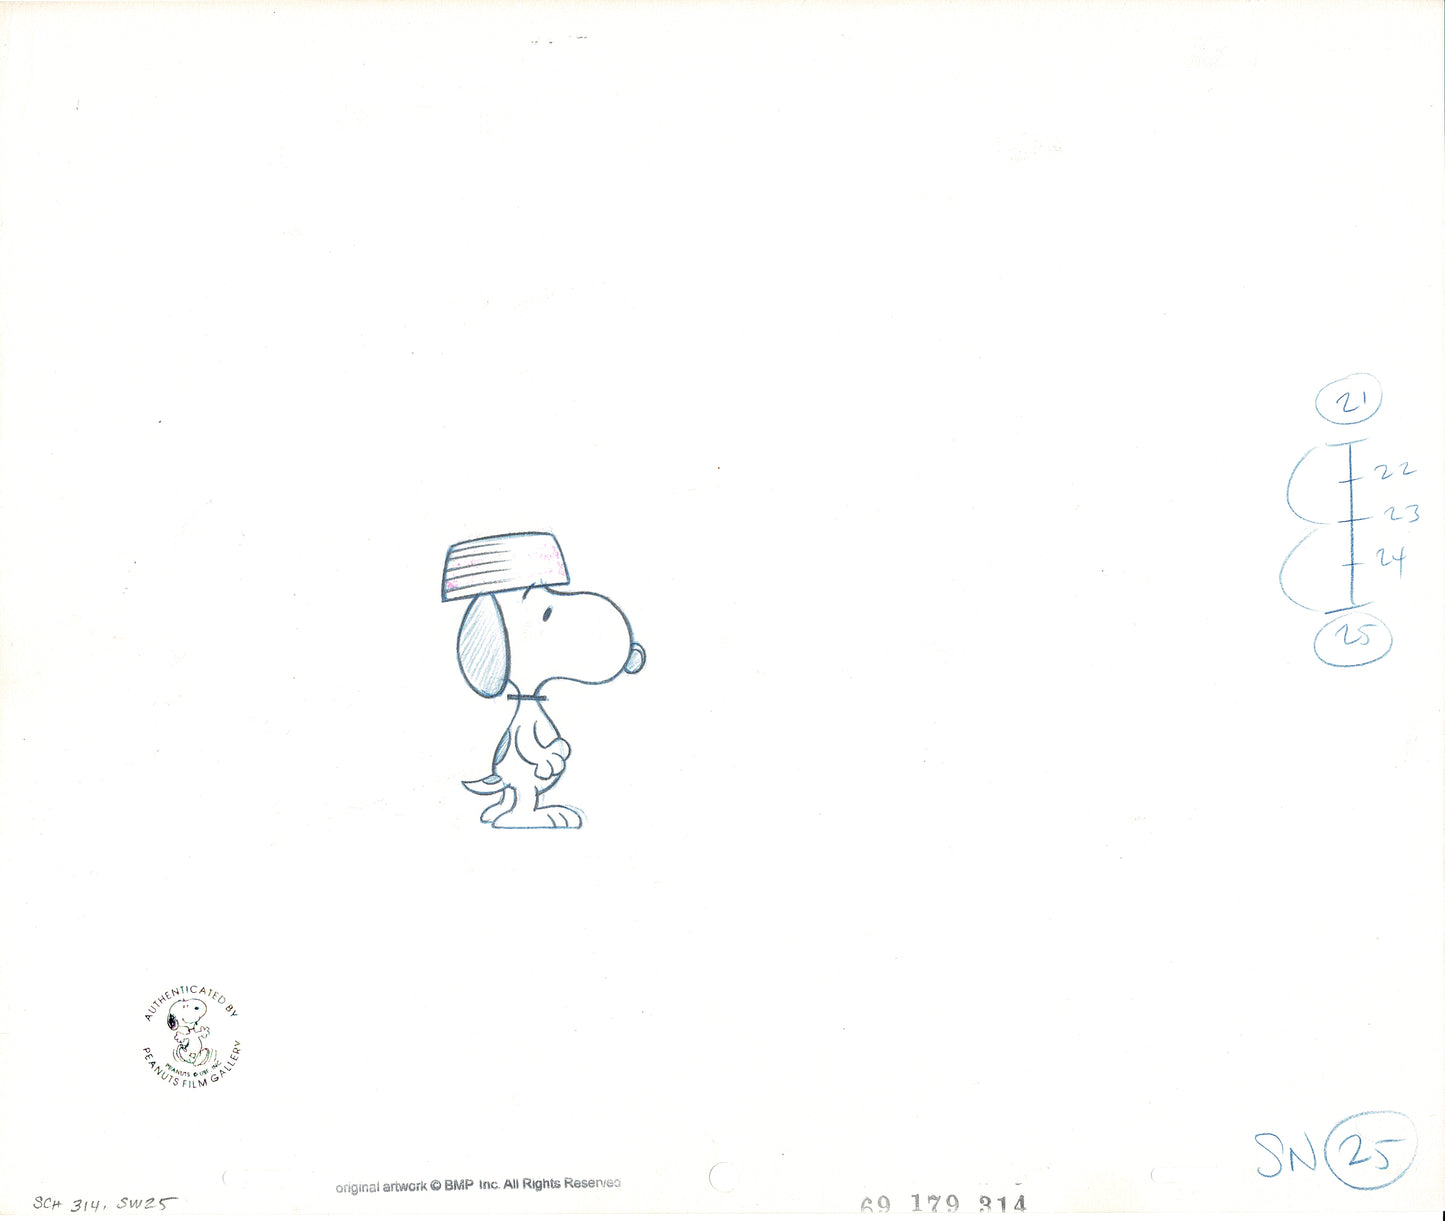 Snoopy Come Home Production Animation Cel Setup with Two Drawings 1972 from Charles Schulz Charlie Brown Peanuts Melendez Studio N25